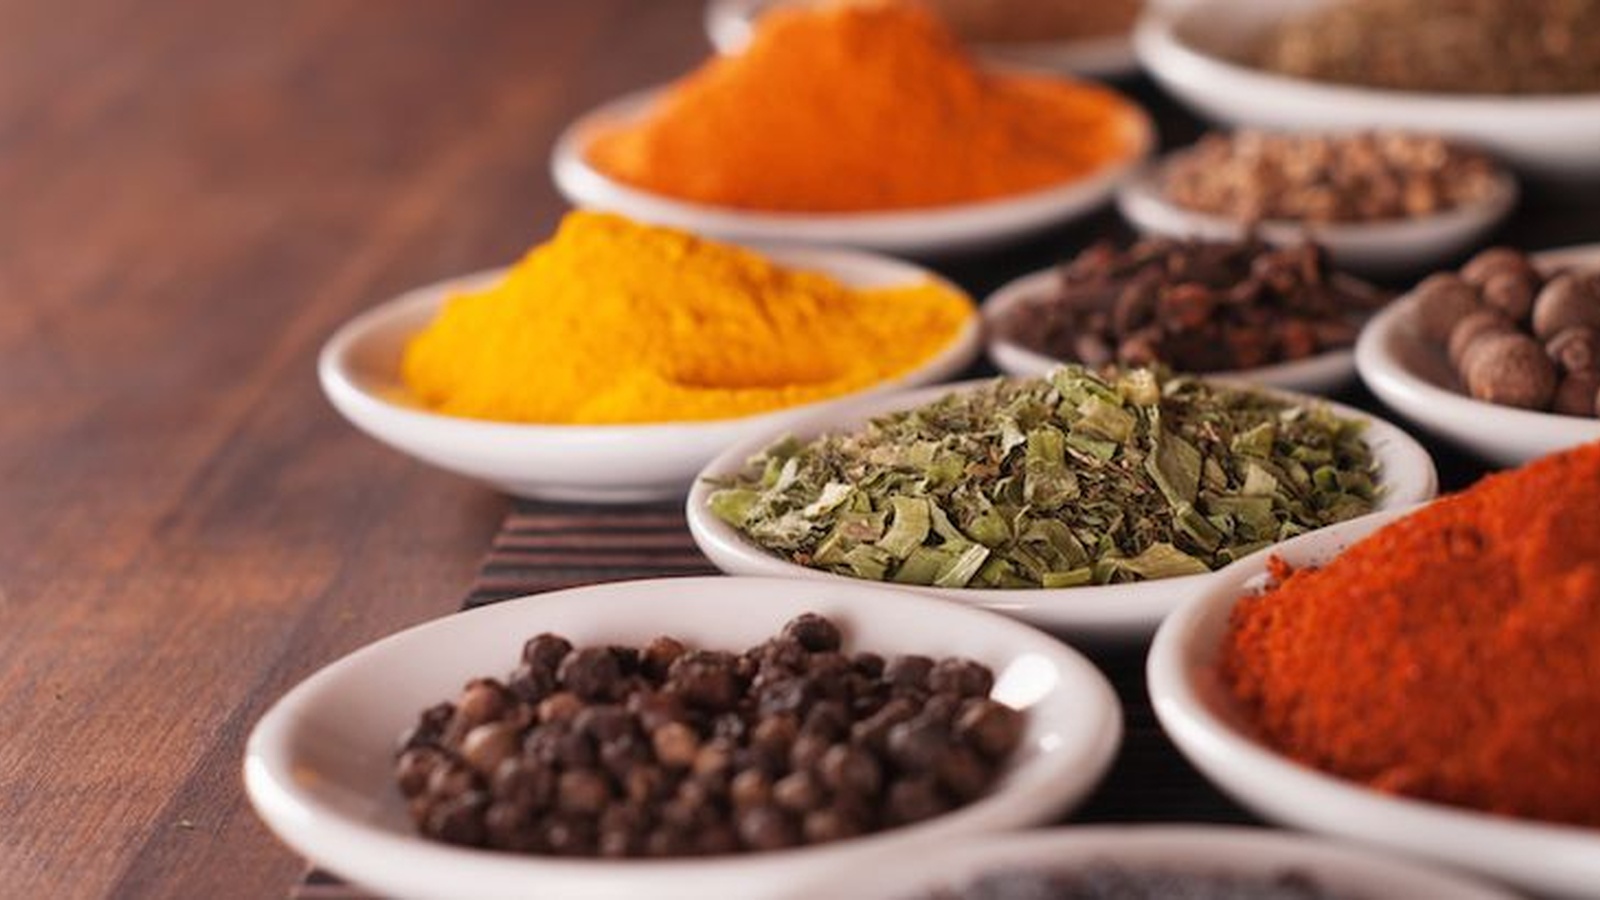 5 Natural Cramp Remedies from the Spice Rack